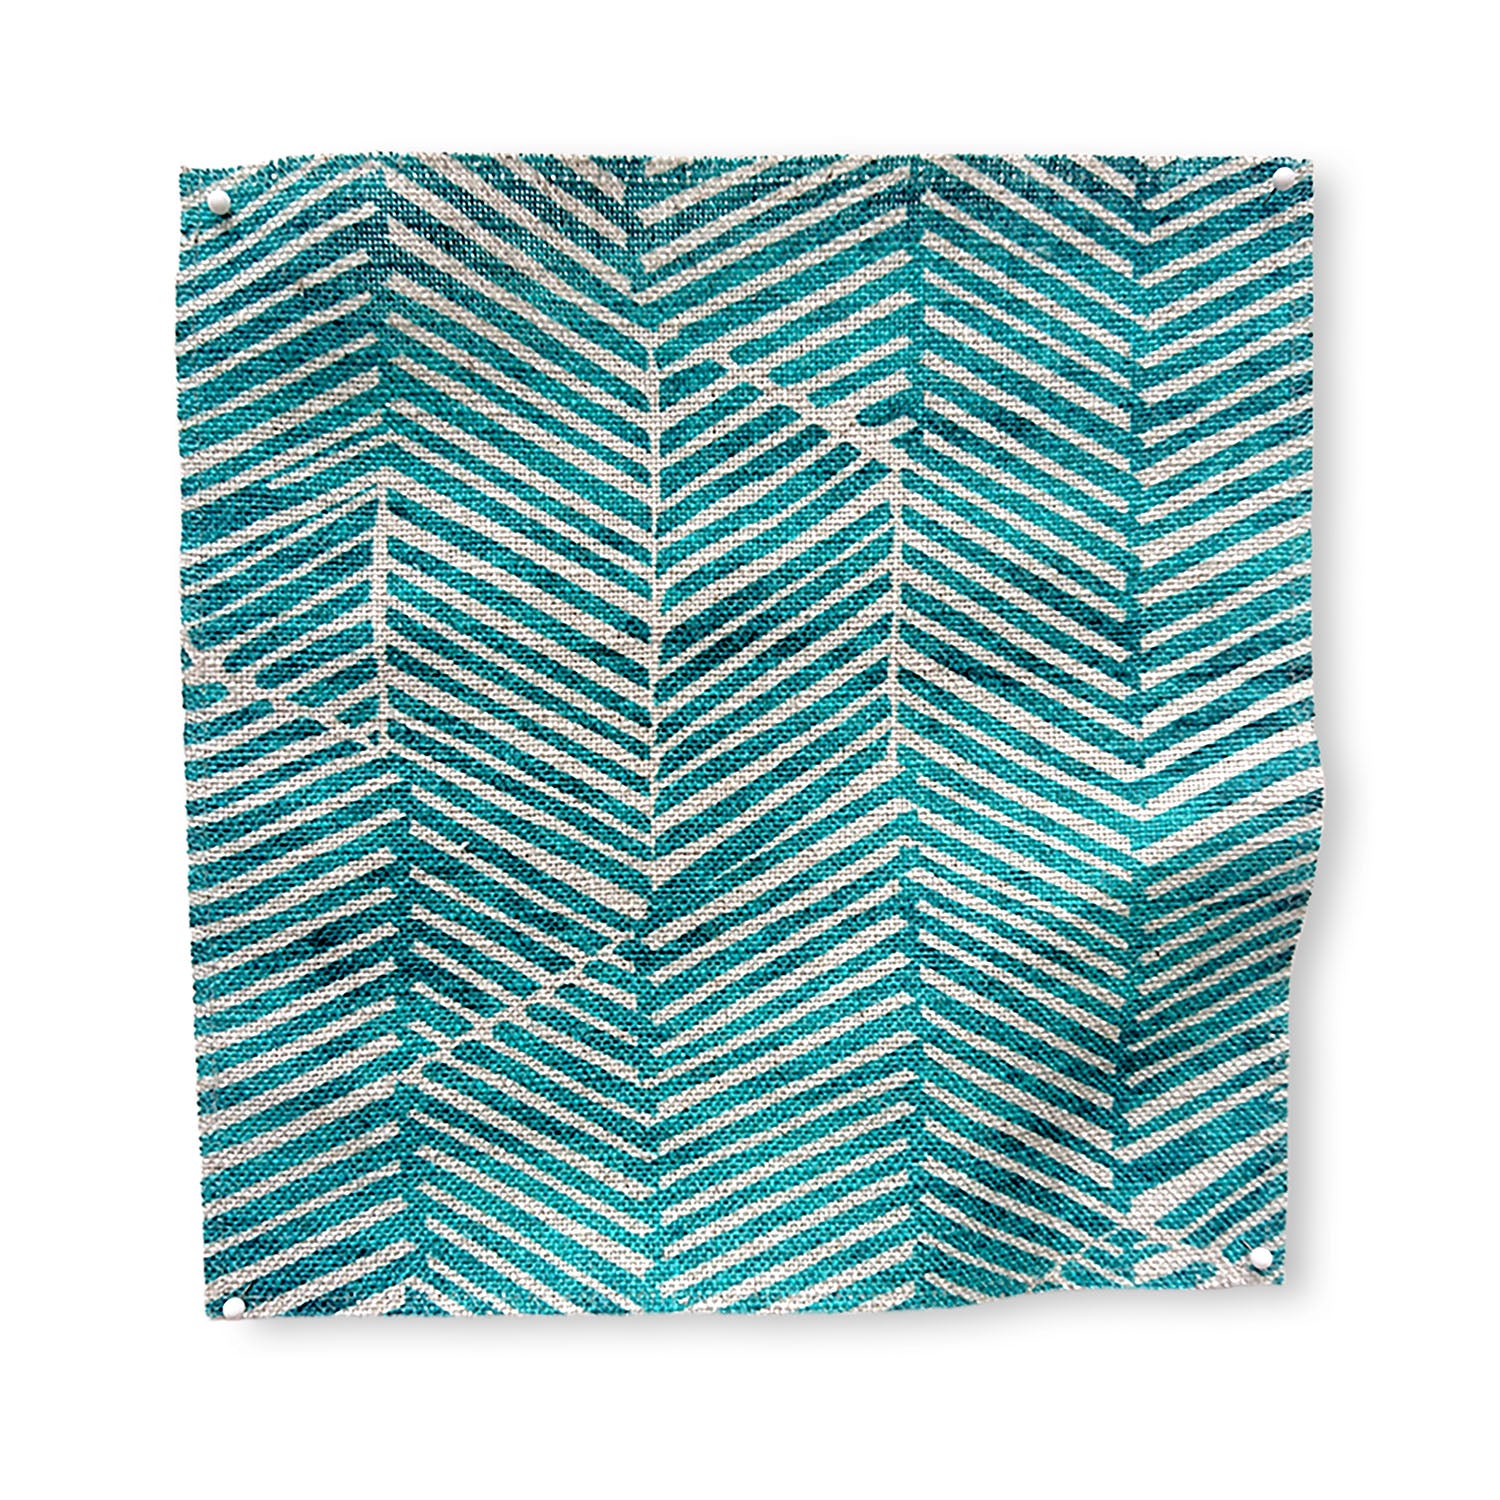 Square fabric swatch in a dense herringbone print in turquoise on a tan field.